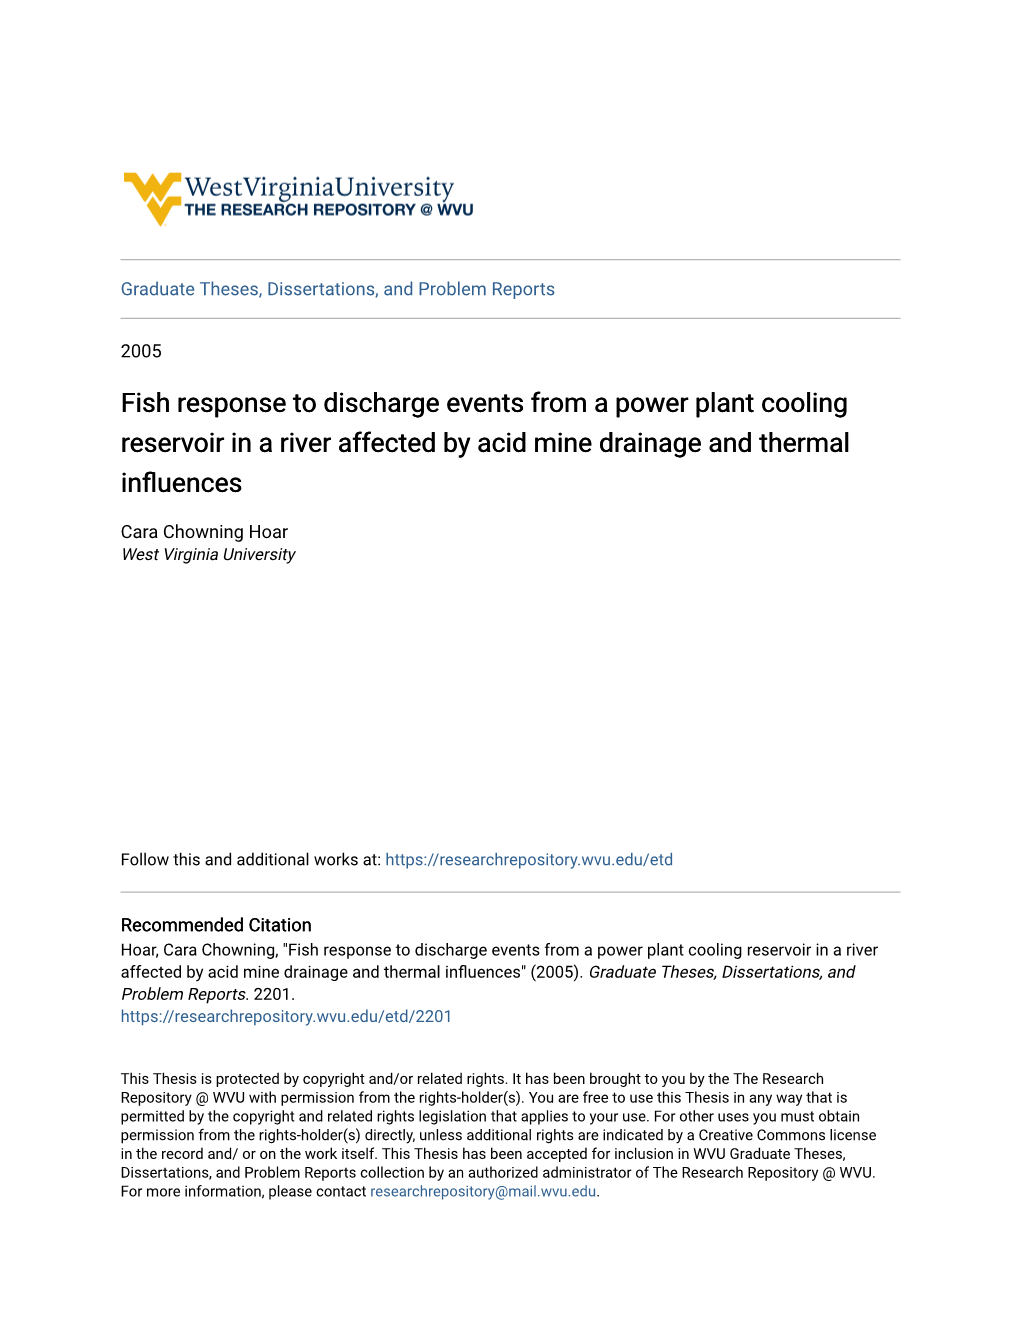 Fish Response to Discharge Events from a Power Plant Cooling Reservoir in a River Affected by Acid Mine Drainage and Thermal Influences